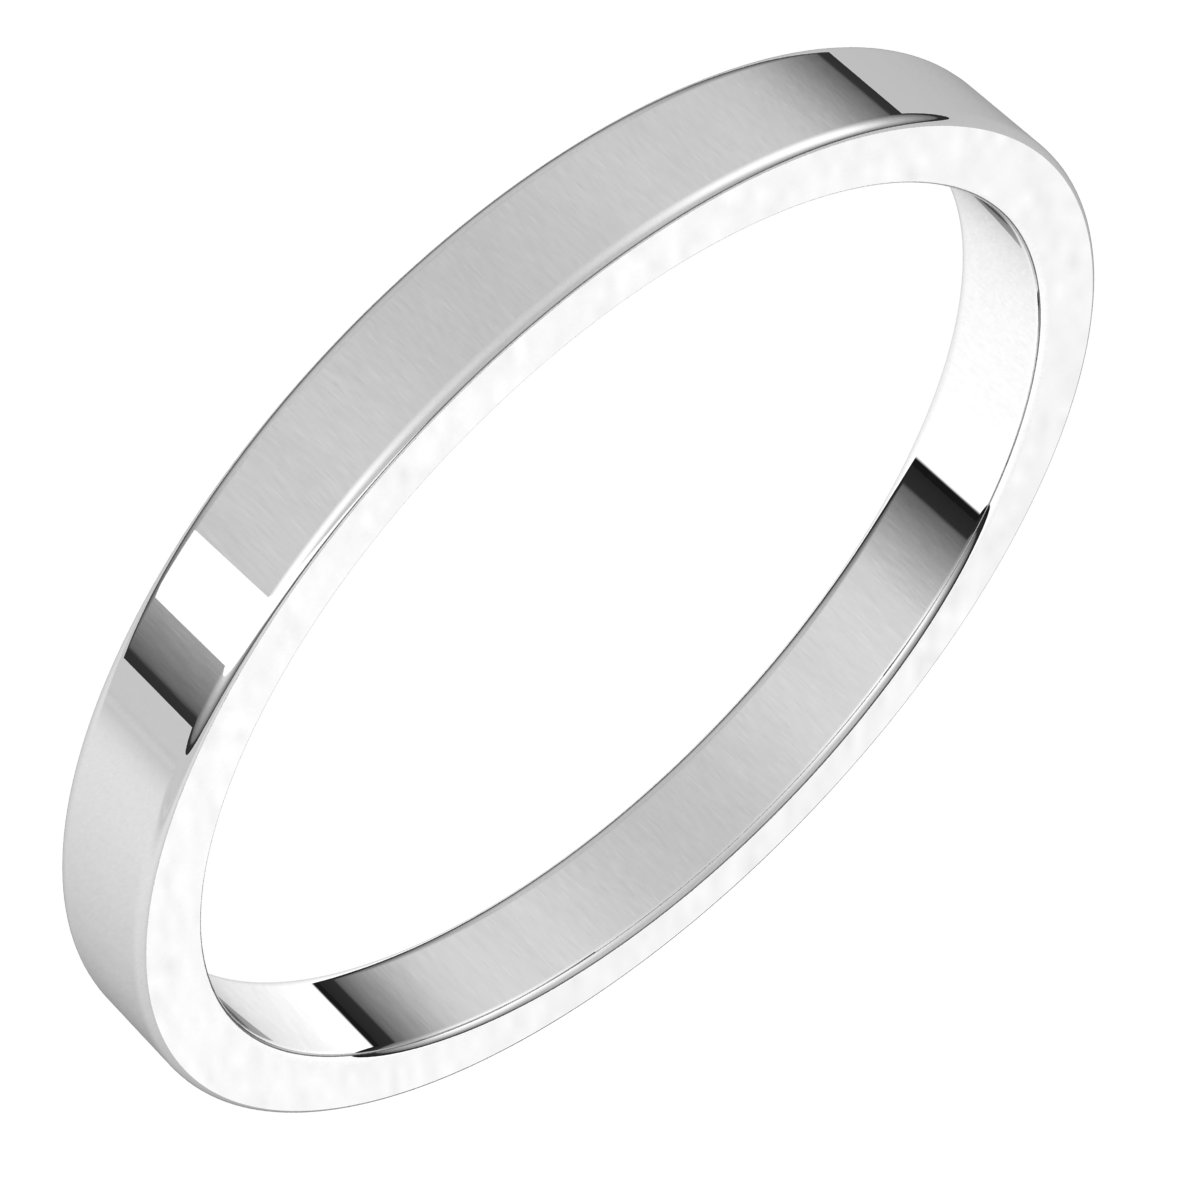 Continuum Sterling Silver 2 mm Flat Band Size 10.5 Ref 4814979